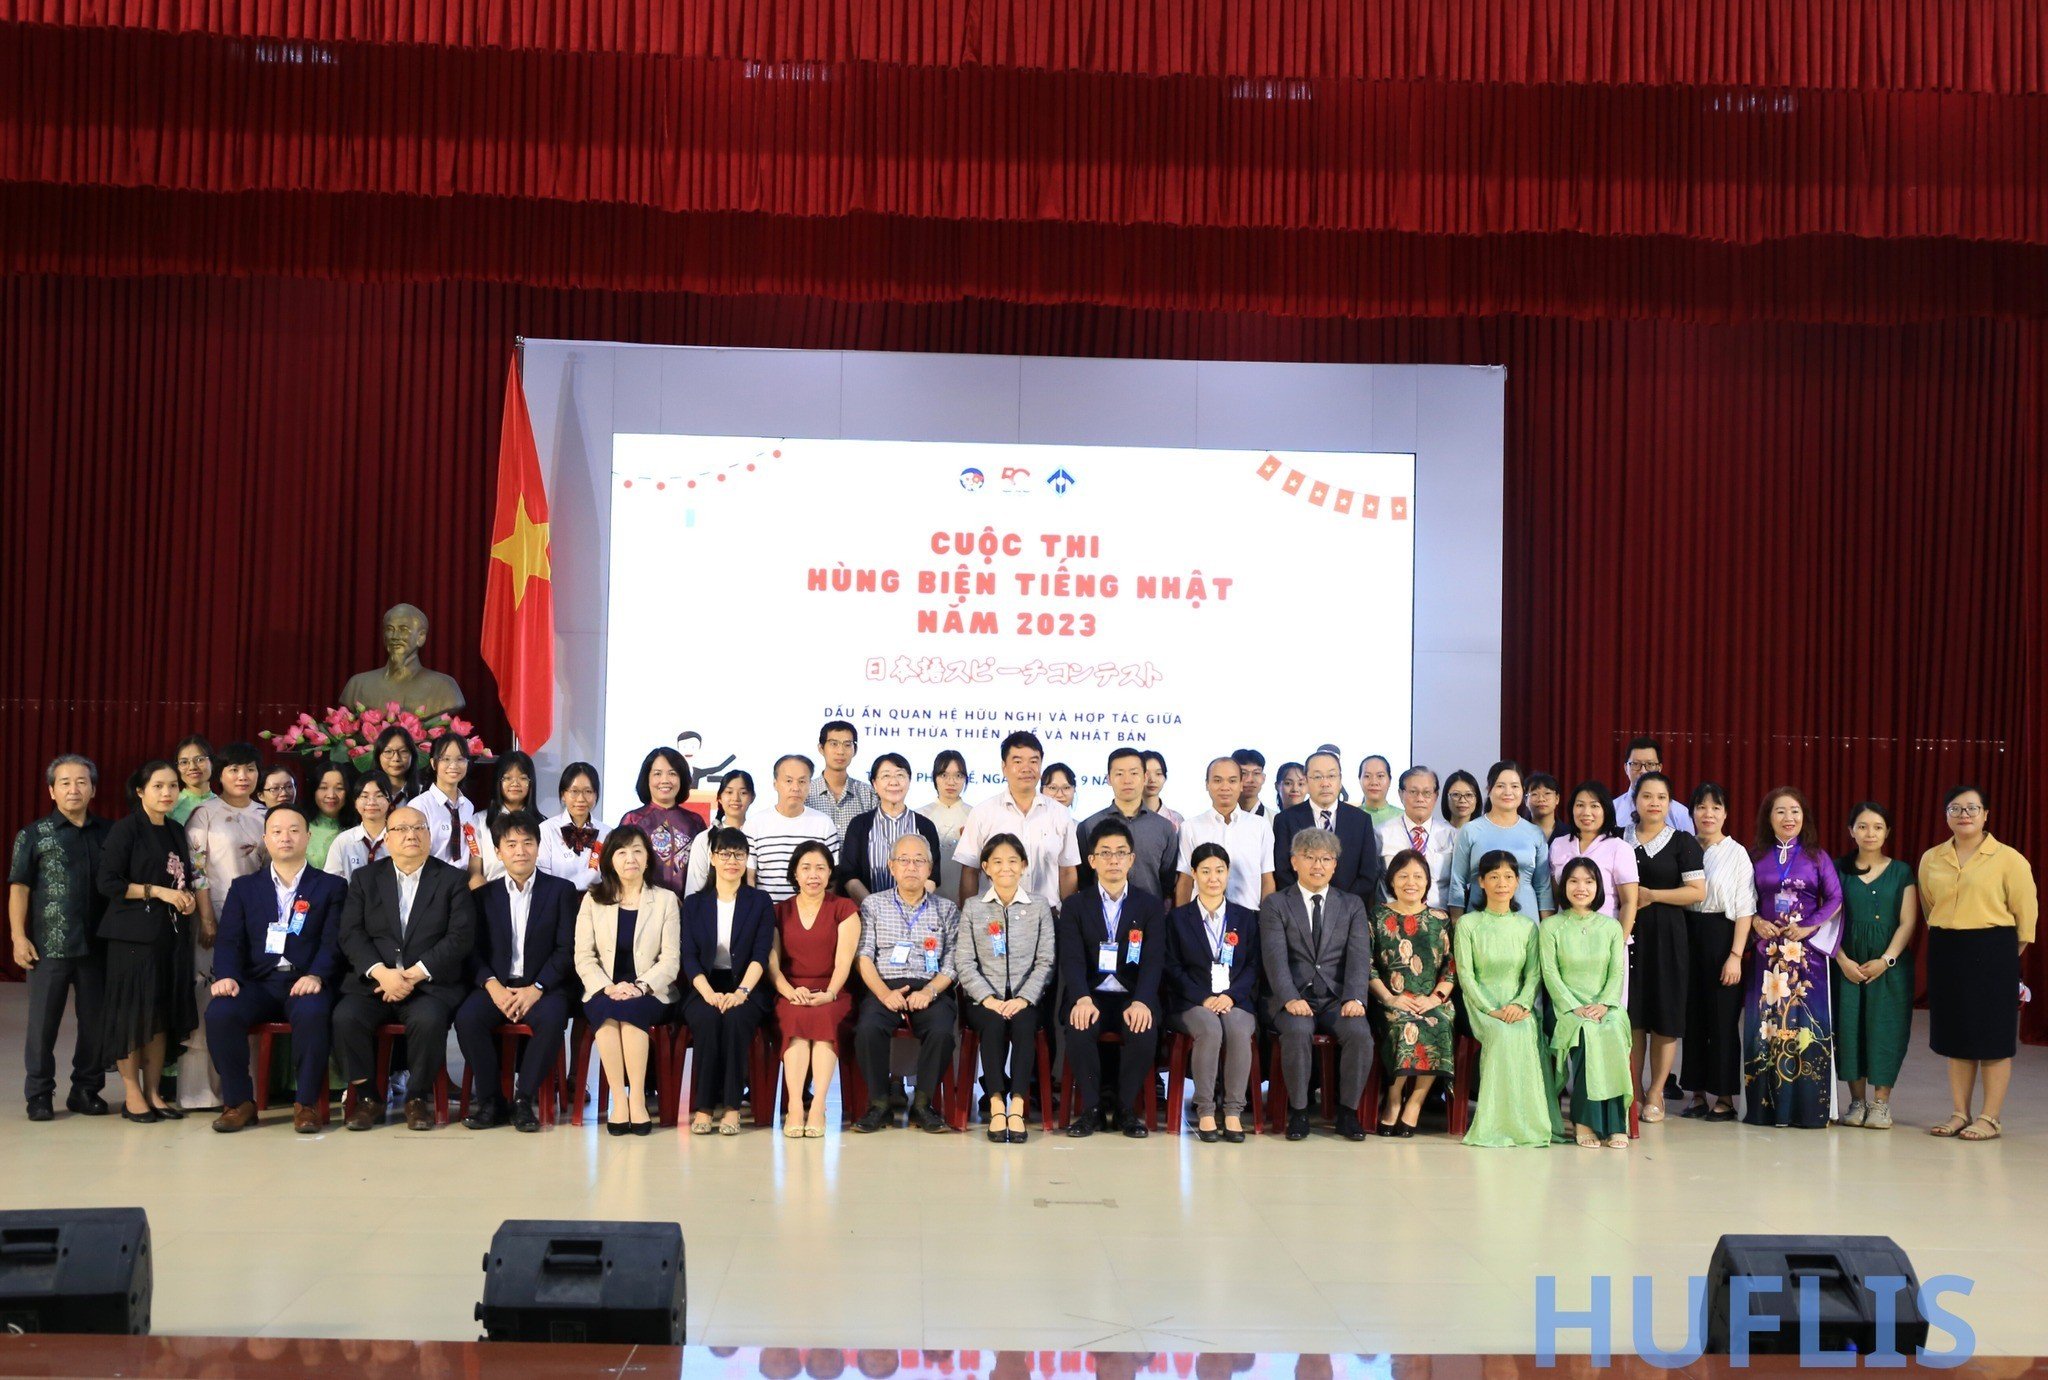 important-events-to-celebrate-50-years-of-diplomatic-relations-between-vietnam-and-japan-at-the-university-of-foreign-languages-and-international-studies-hue-university